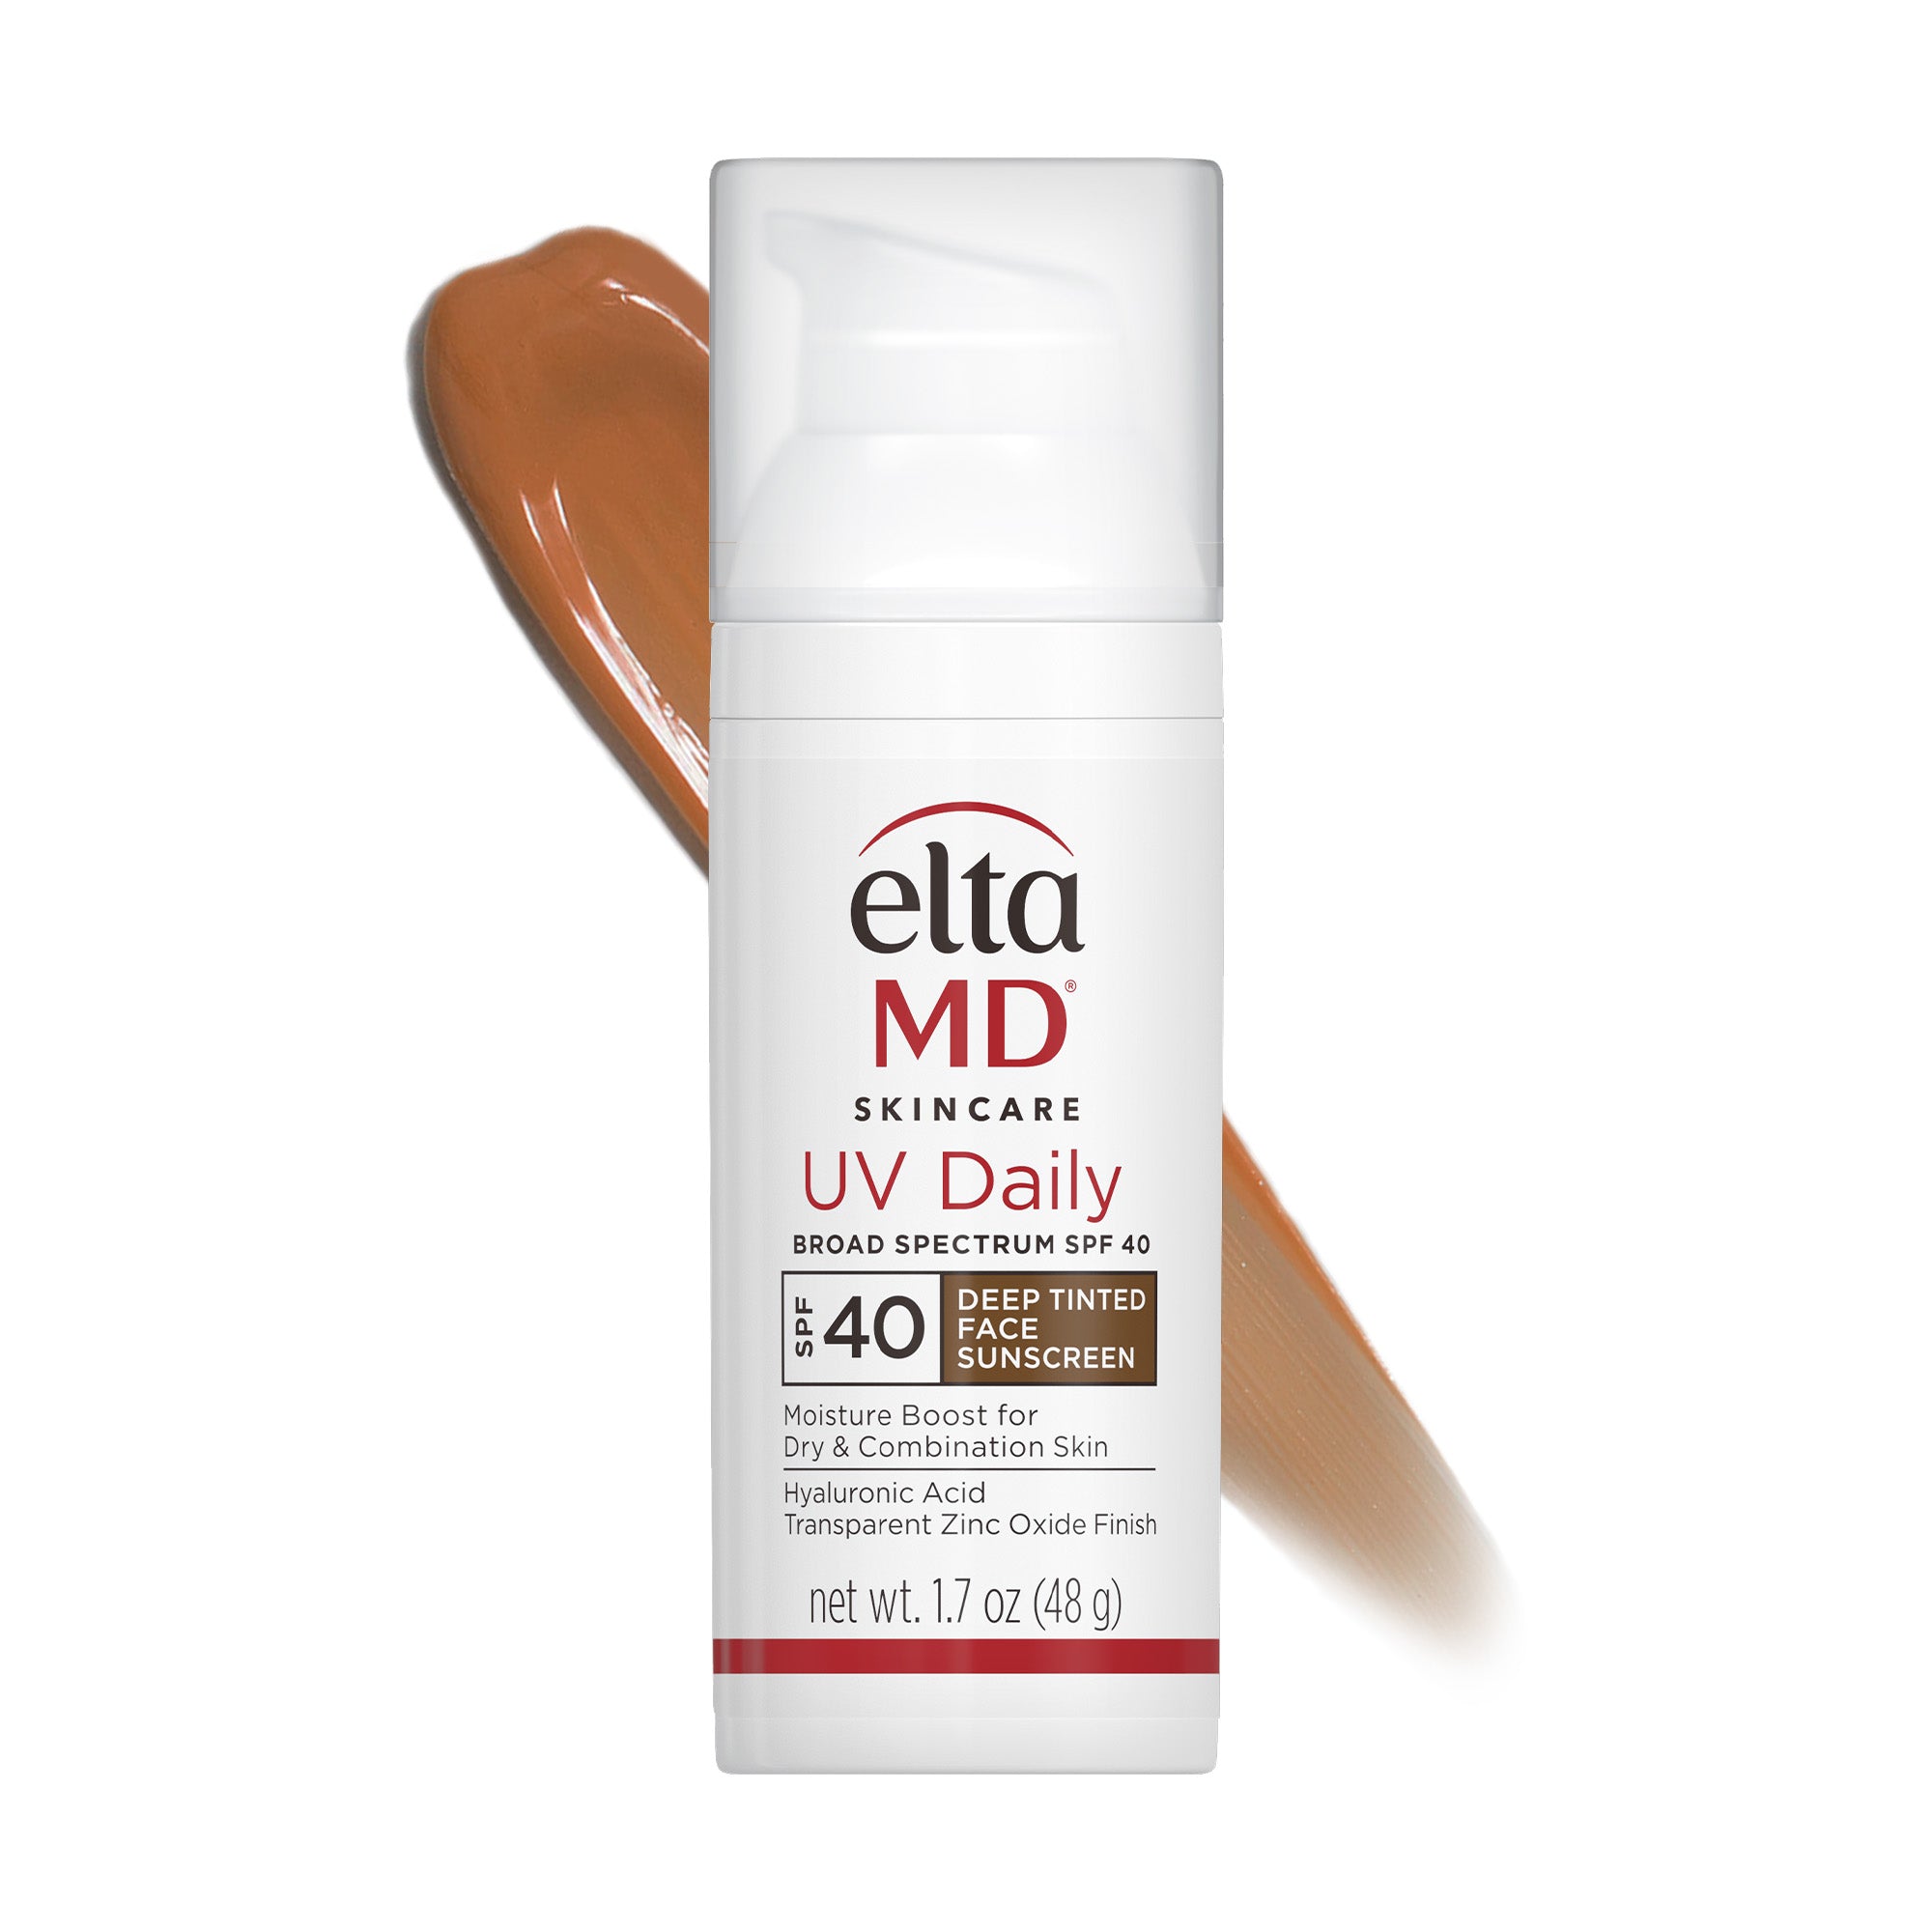 EltaMD UV Daily Deep Tinted Face Sunscreen SPF 40 shop at Exclusive Beauty